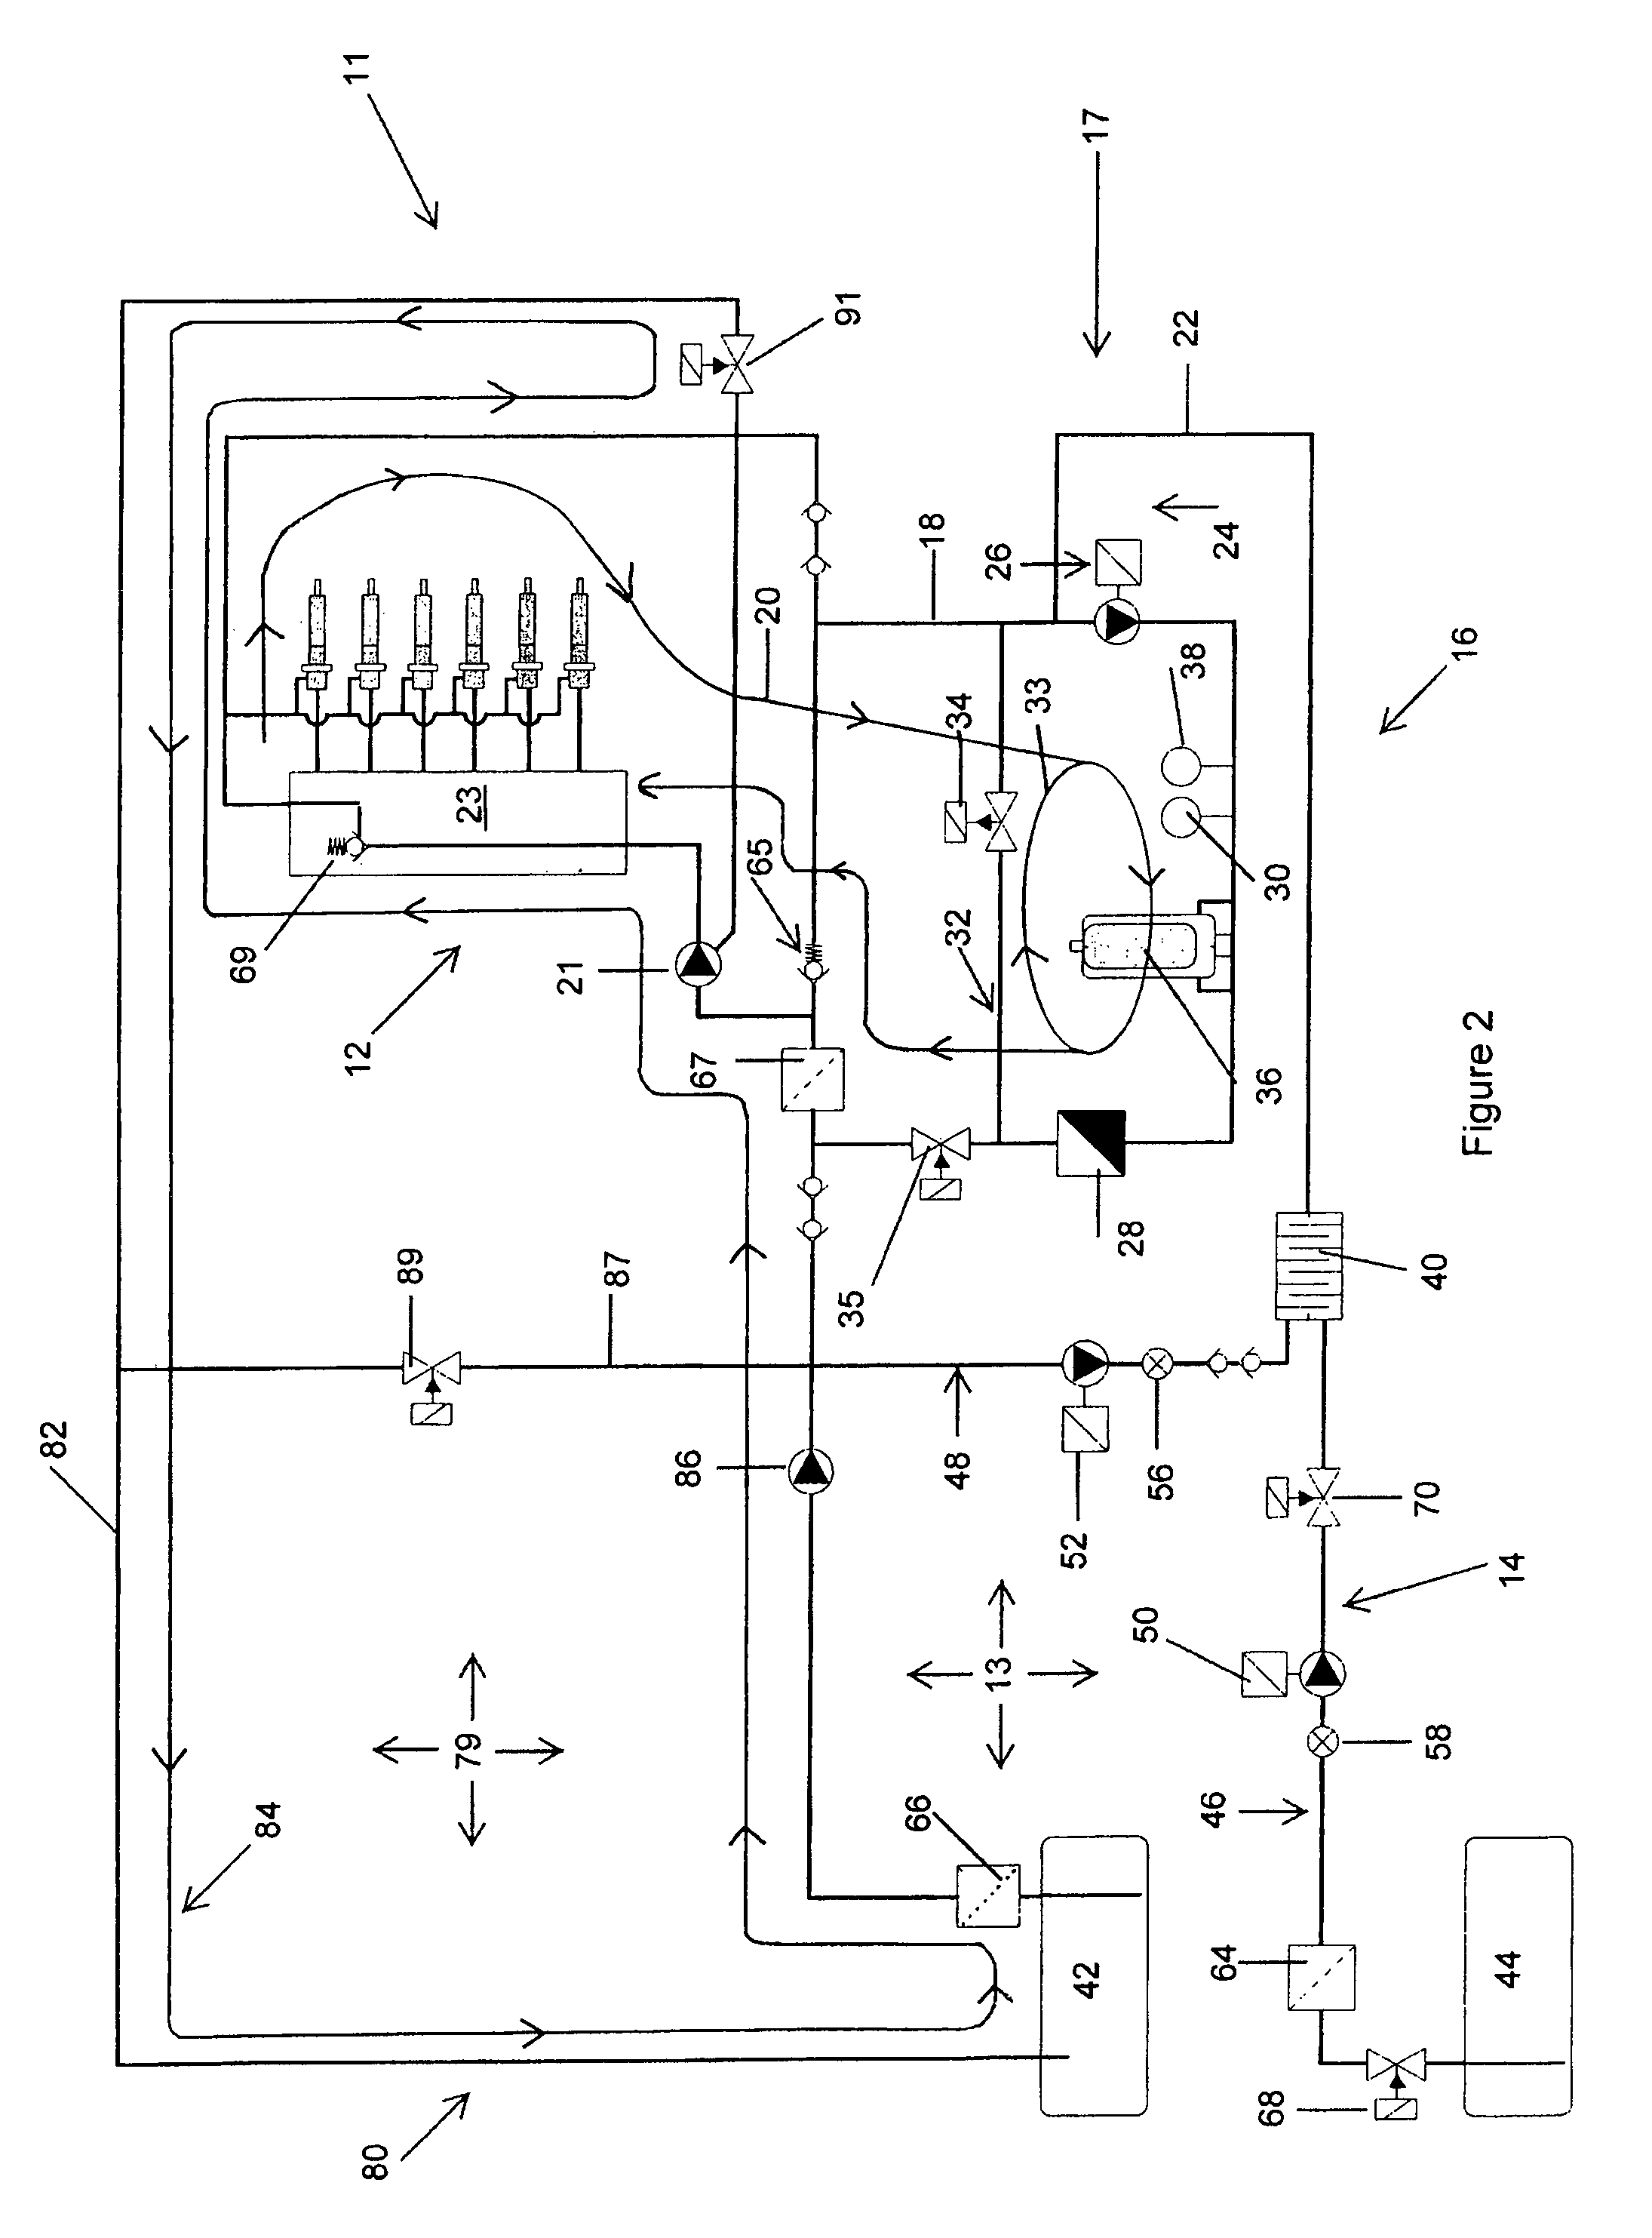 Dual fuel supply system for a direct-injection system of a diesel engine with on-board mixing